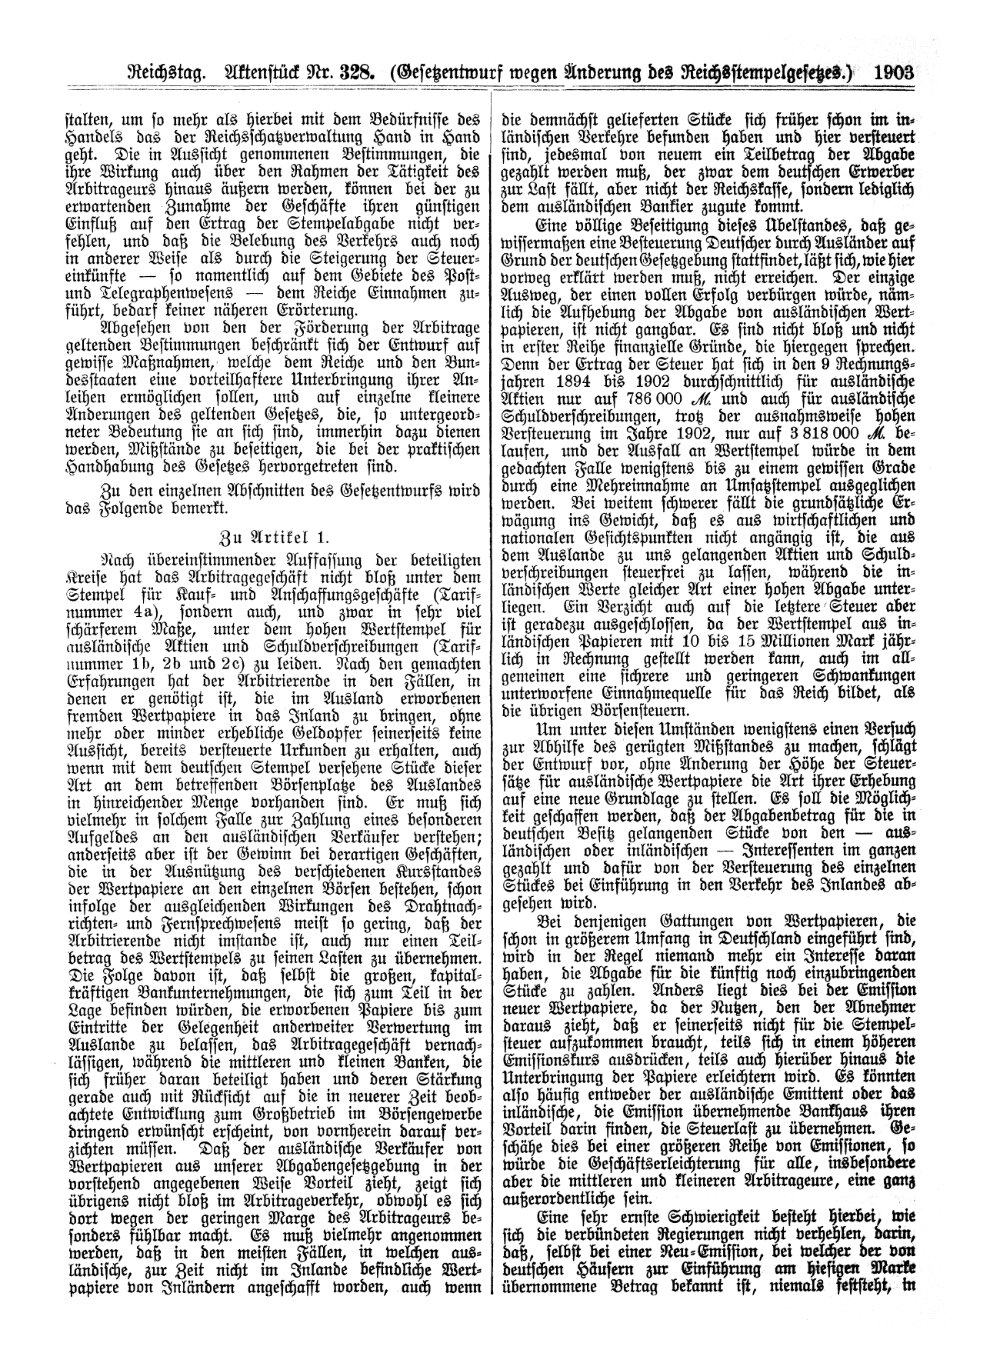 Scan of page 1903